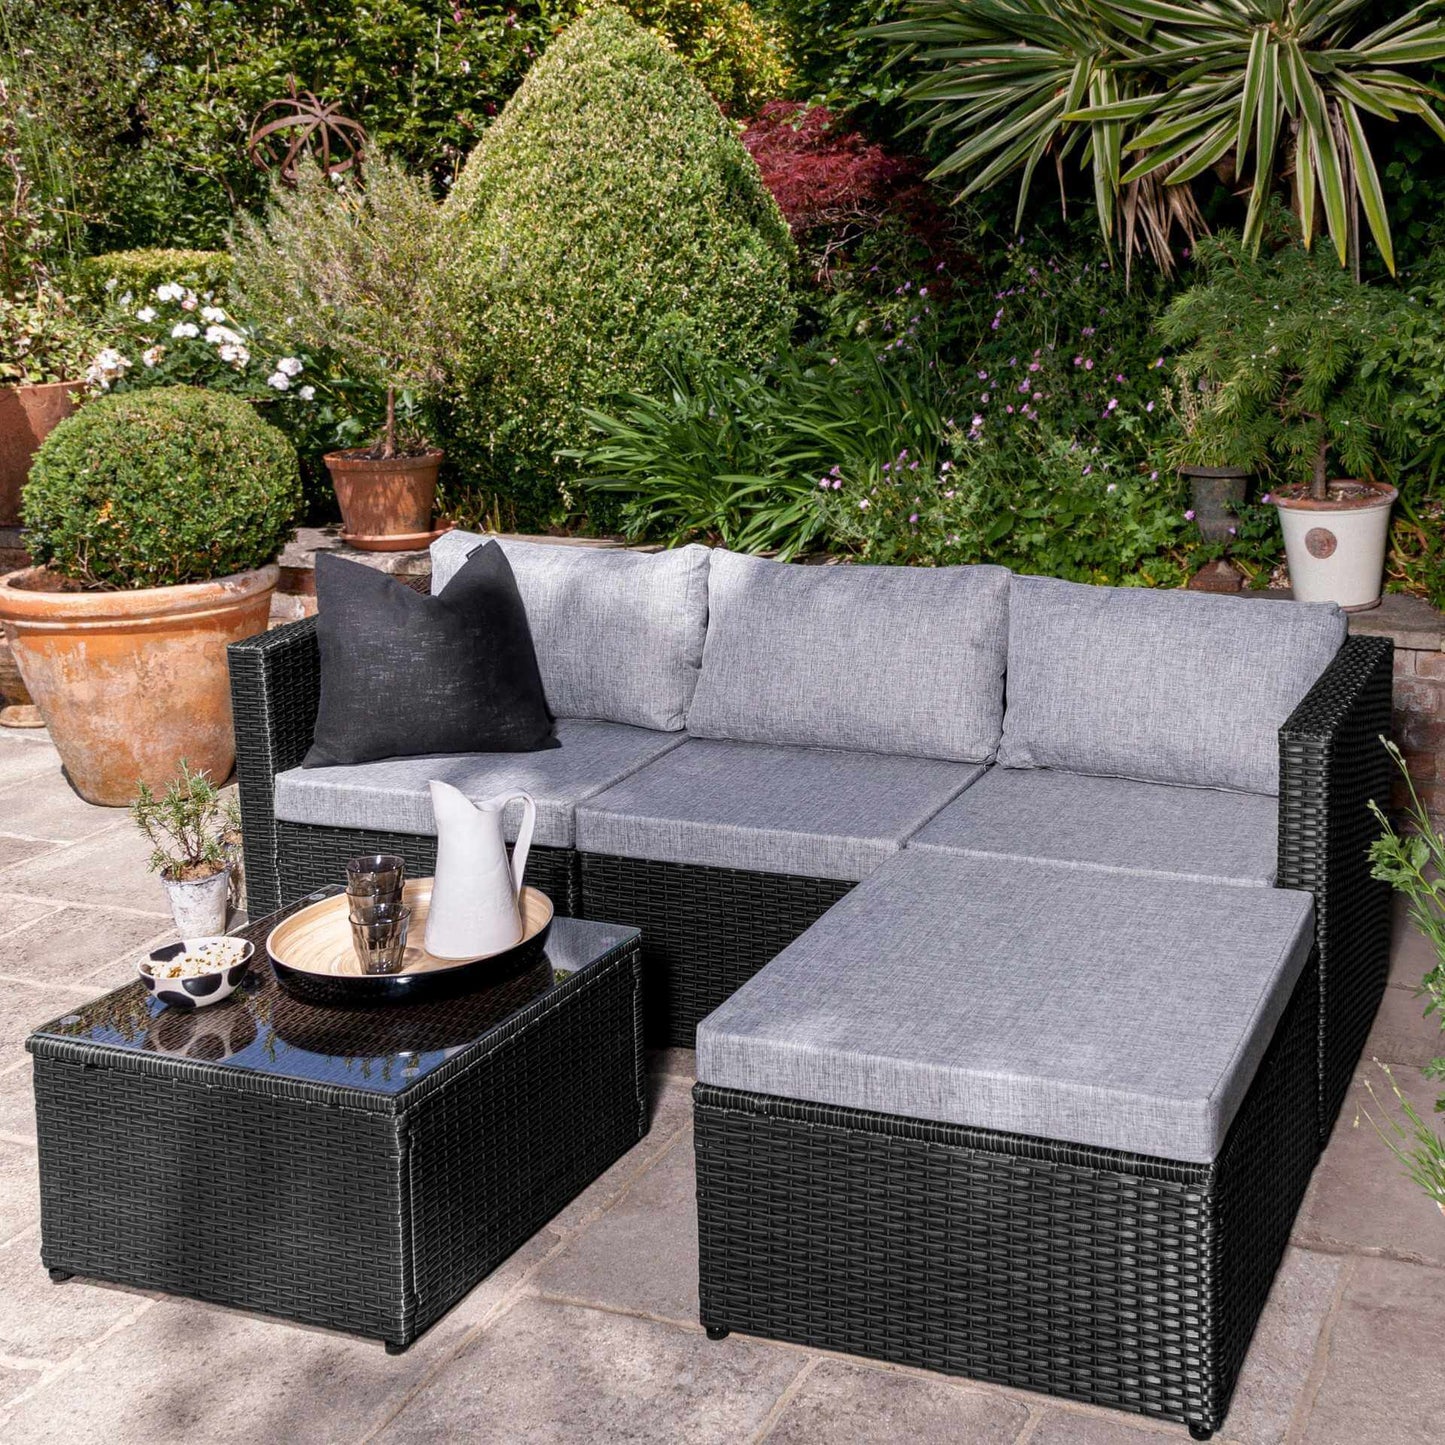 Weston 4 Seater Rattan Corner Sofa Set with LED Cantilever Parasol and Base - Black Weave